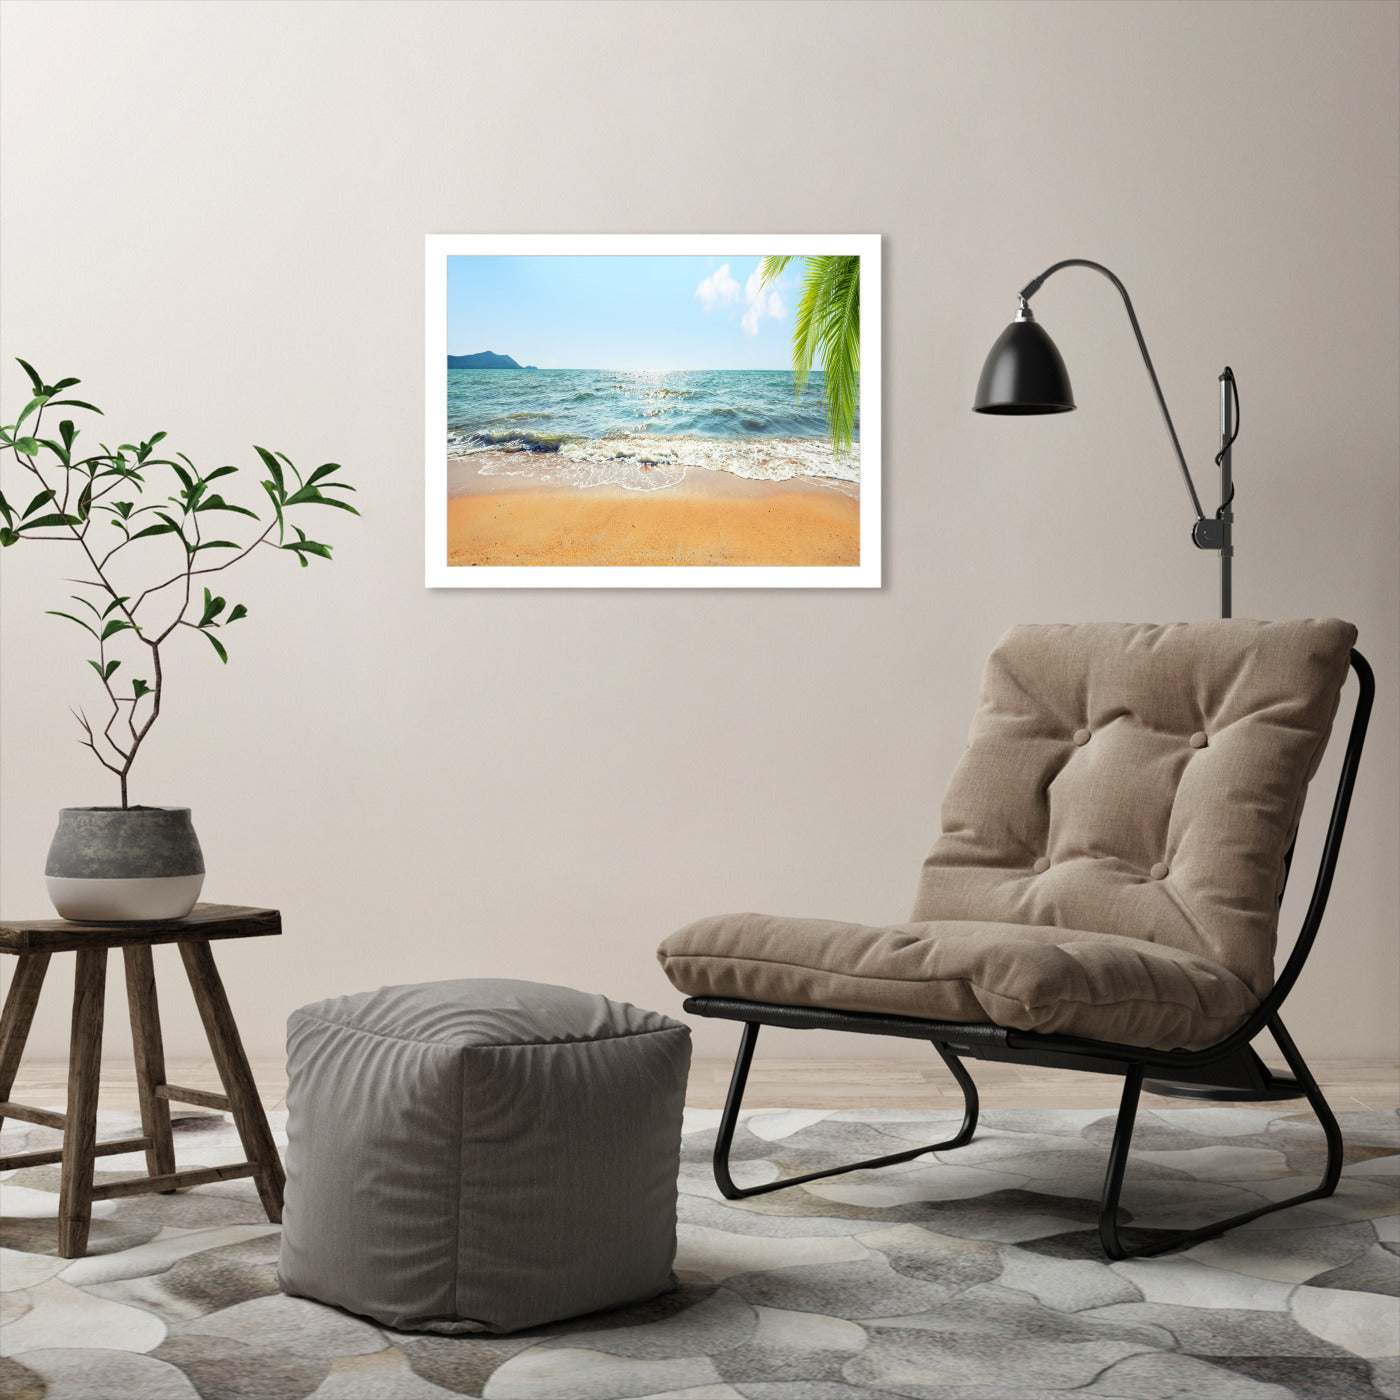 Tropical Island by Manjik Pictures - Framed Print